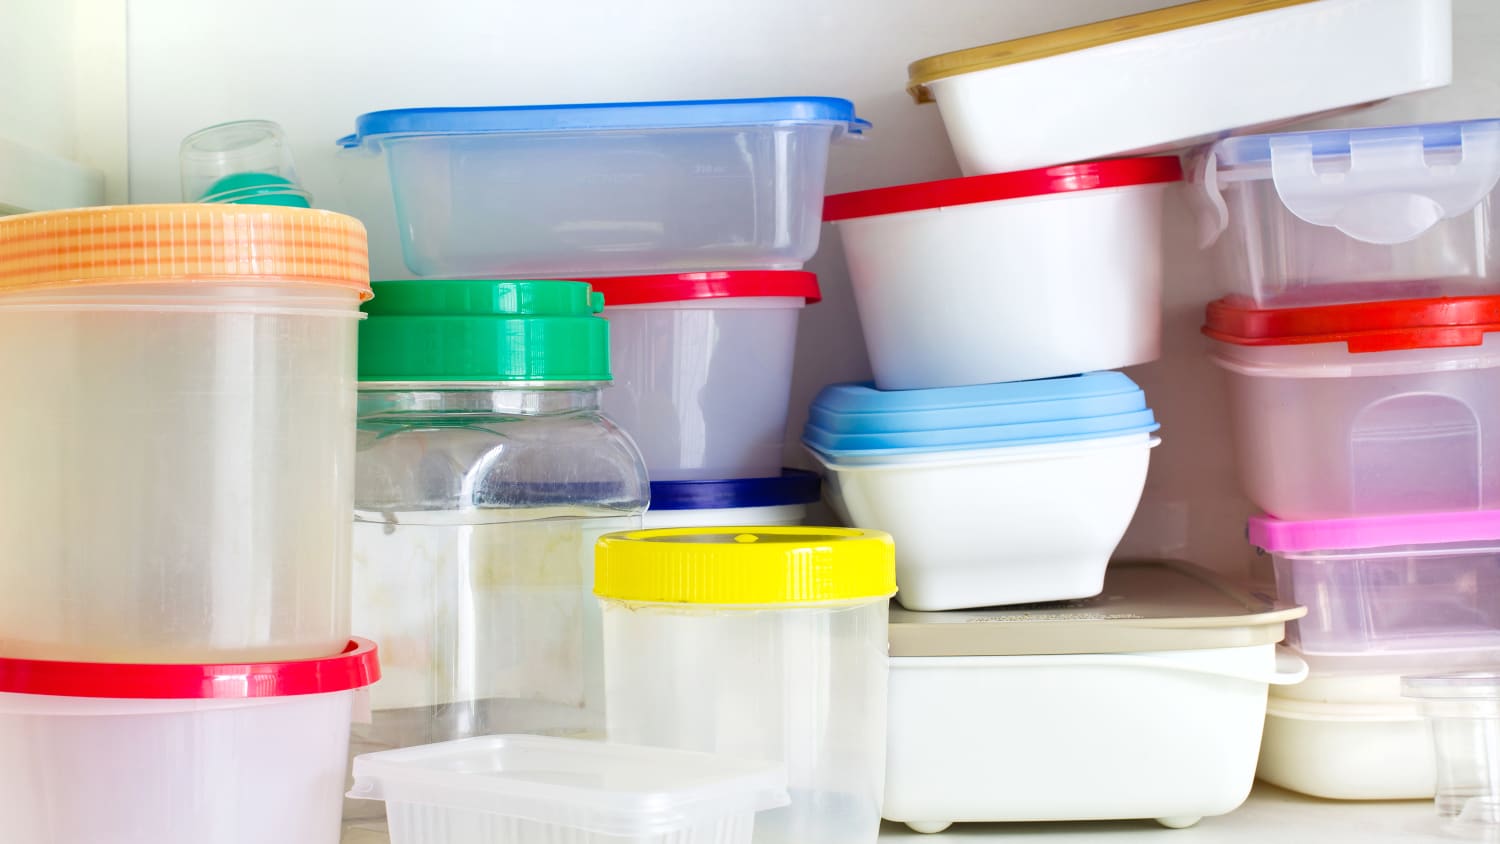 https://cdn.apartmenttherapy.info/image/upload/f_jpg,q_auto:eco,c_fill,g_auto,w_1500,ar_16:9/at%2Forganize-clean%2Ffood-storage-containers-pile-tupperware